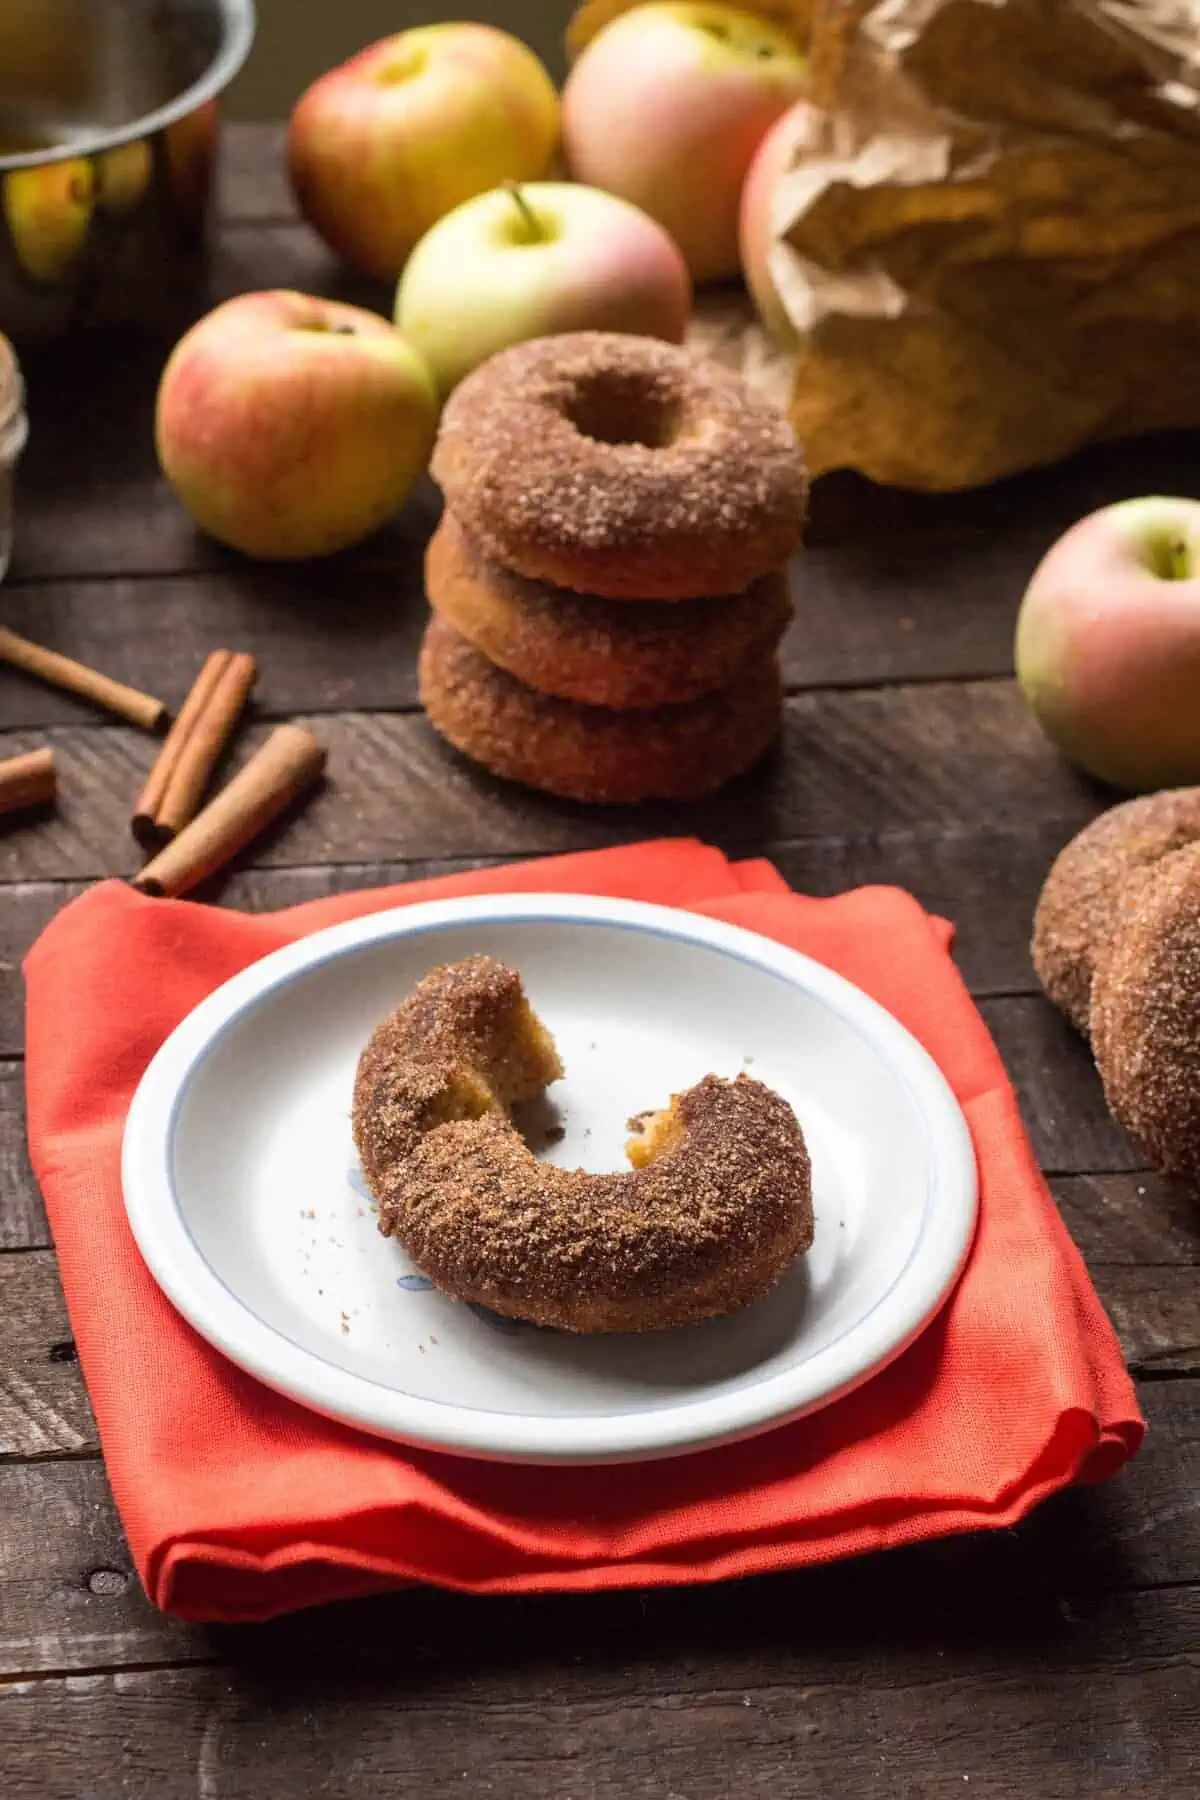 A wood table with doughnuts, apples, and cinnamon sticks around a doughnut on a small white plate.